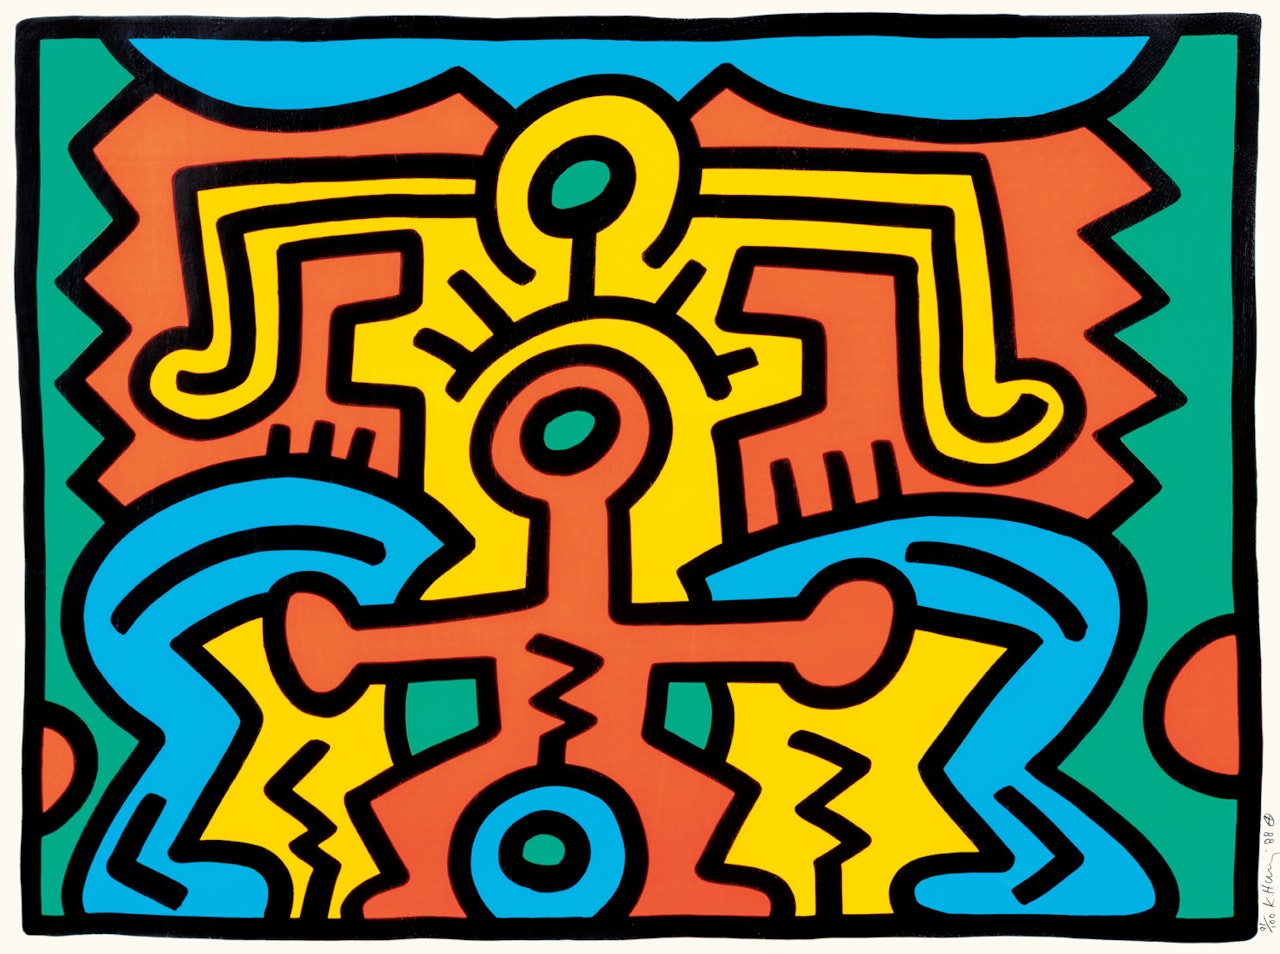 Growing 5(from Growing set) by Keith Haring